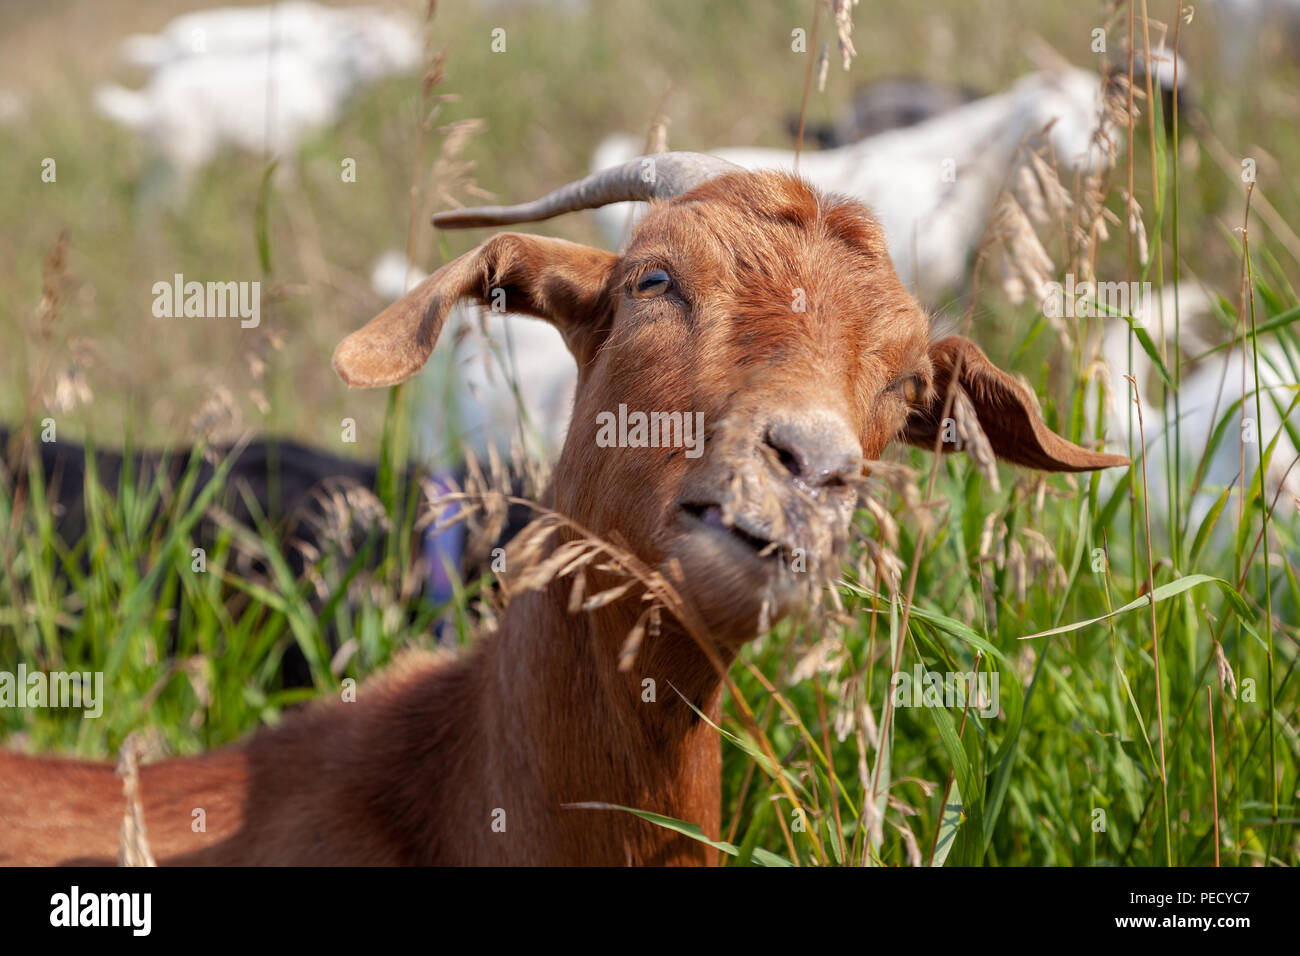 Goats eating up weeds in a Calgary park as part of the city's targeted grazing plan for invasive weed species management using environmentally friendl Stock Photo